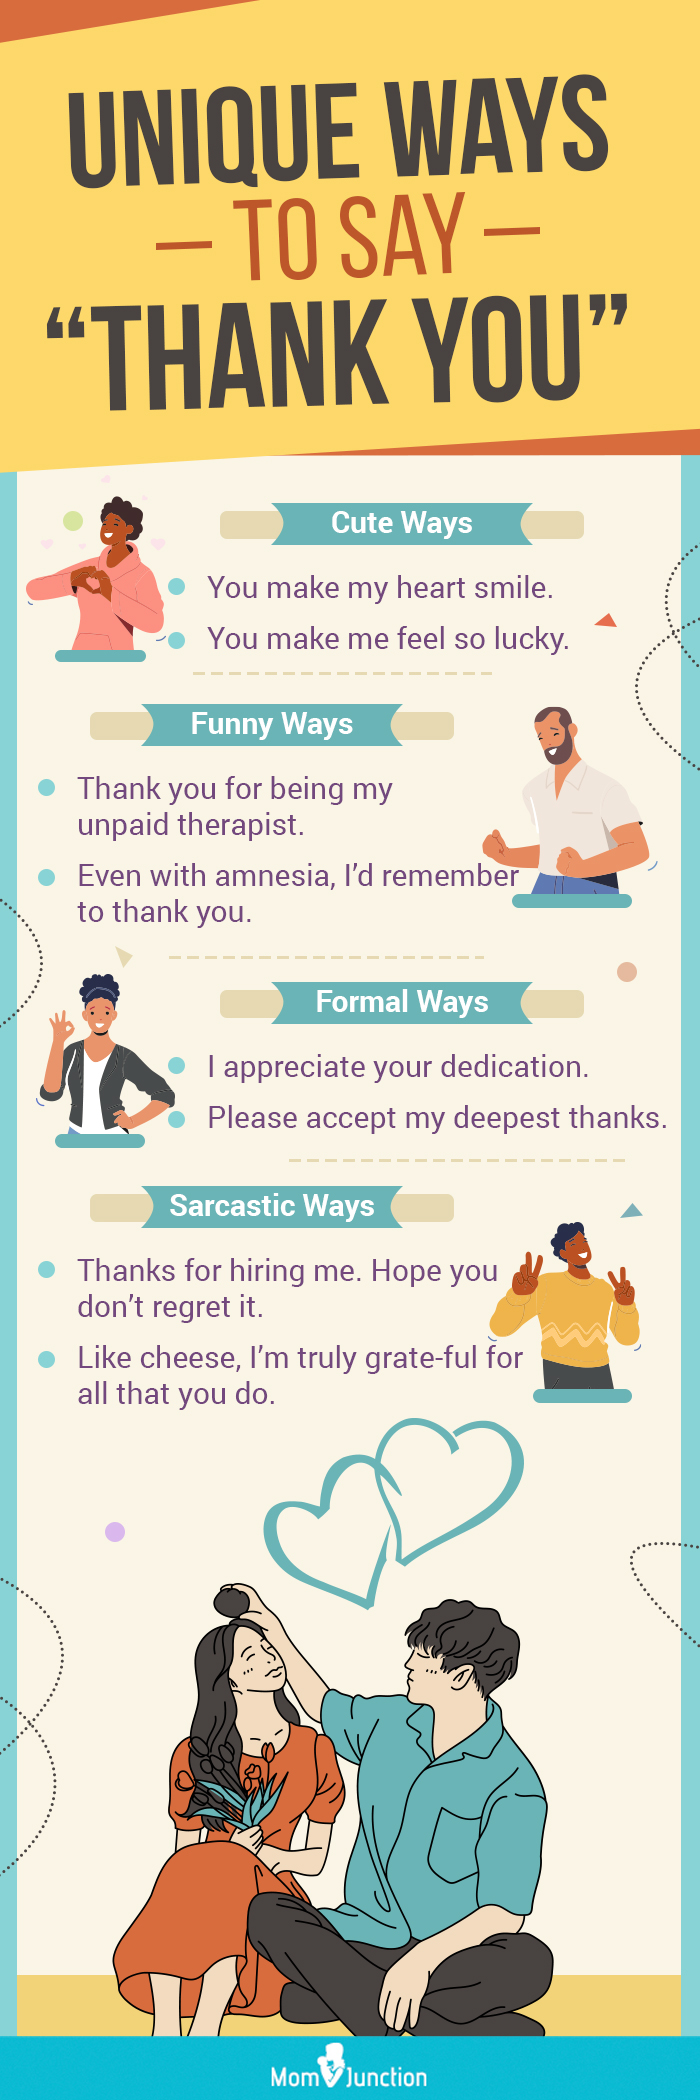 30 Different Ways to Say “Have a Good Day” (Formal and Informal